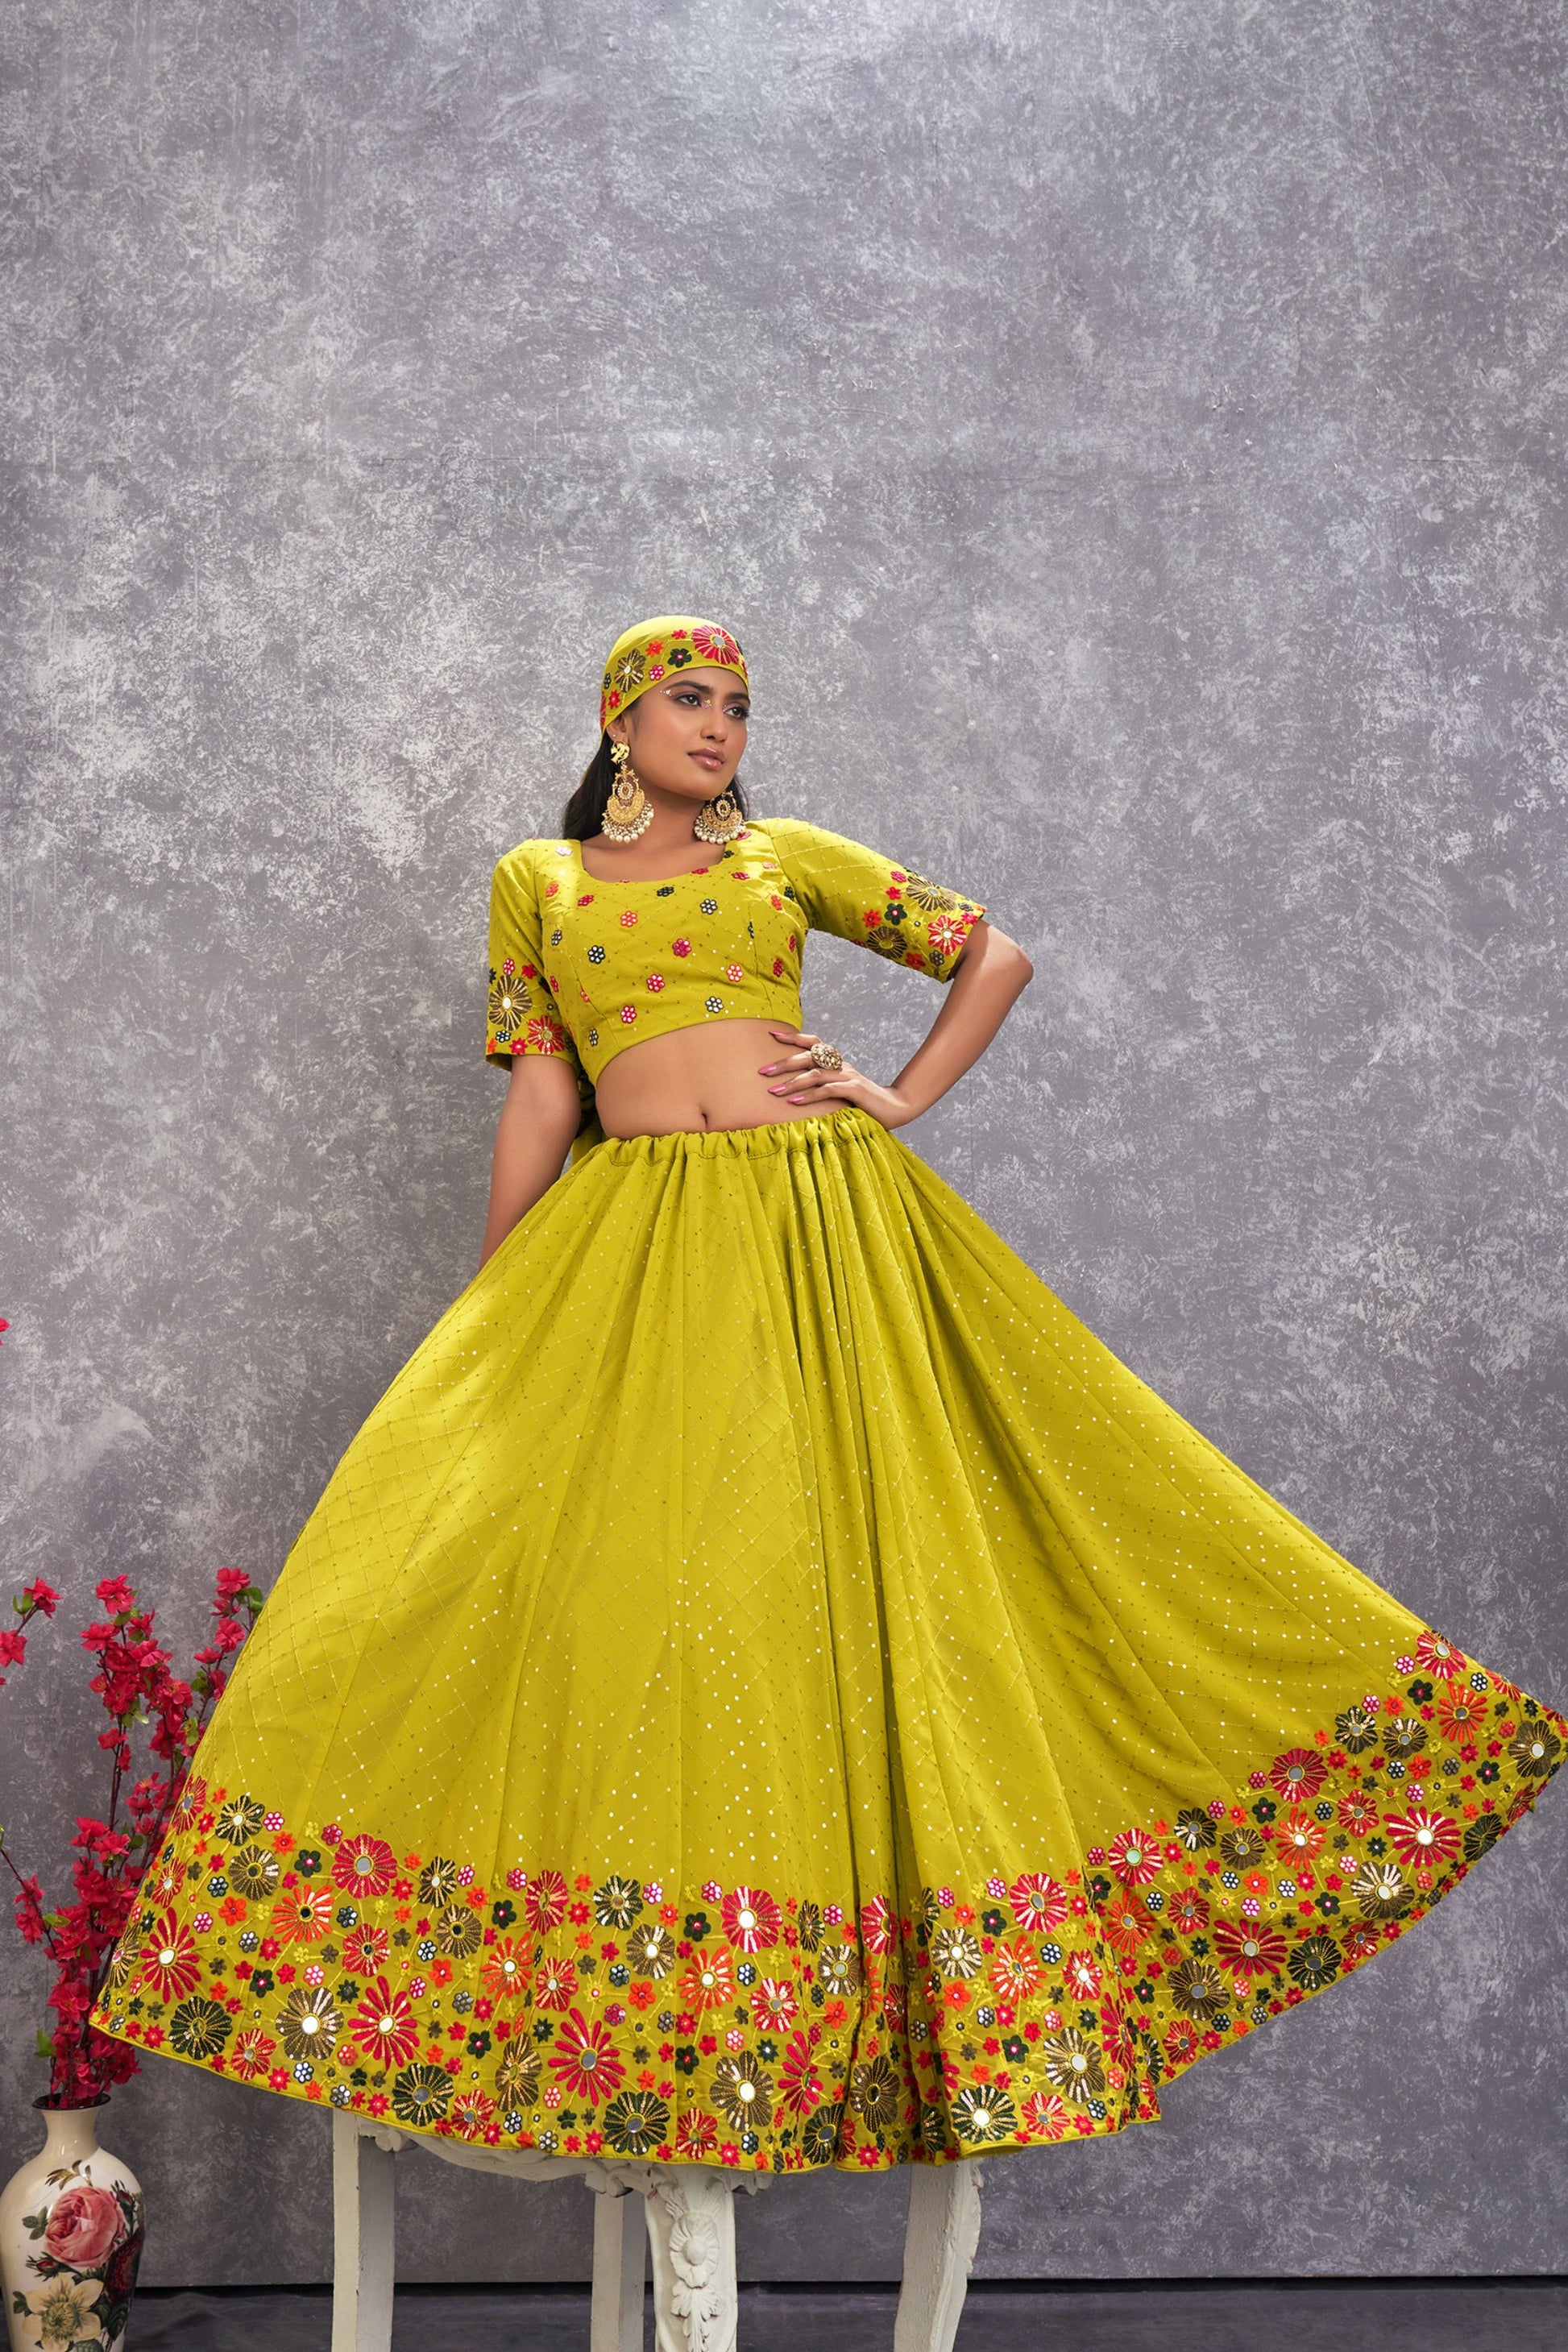 Yellow Georgette Floral Embroidery Lehenga Choli For Indian Festivals & Weddings - Sequence Embroidery Work, Thread Embroidery Work, Mirror Work